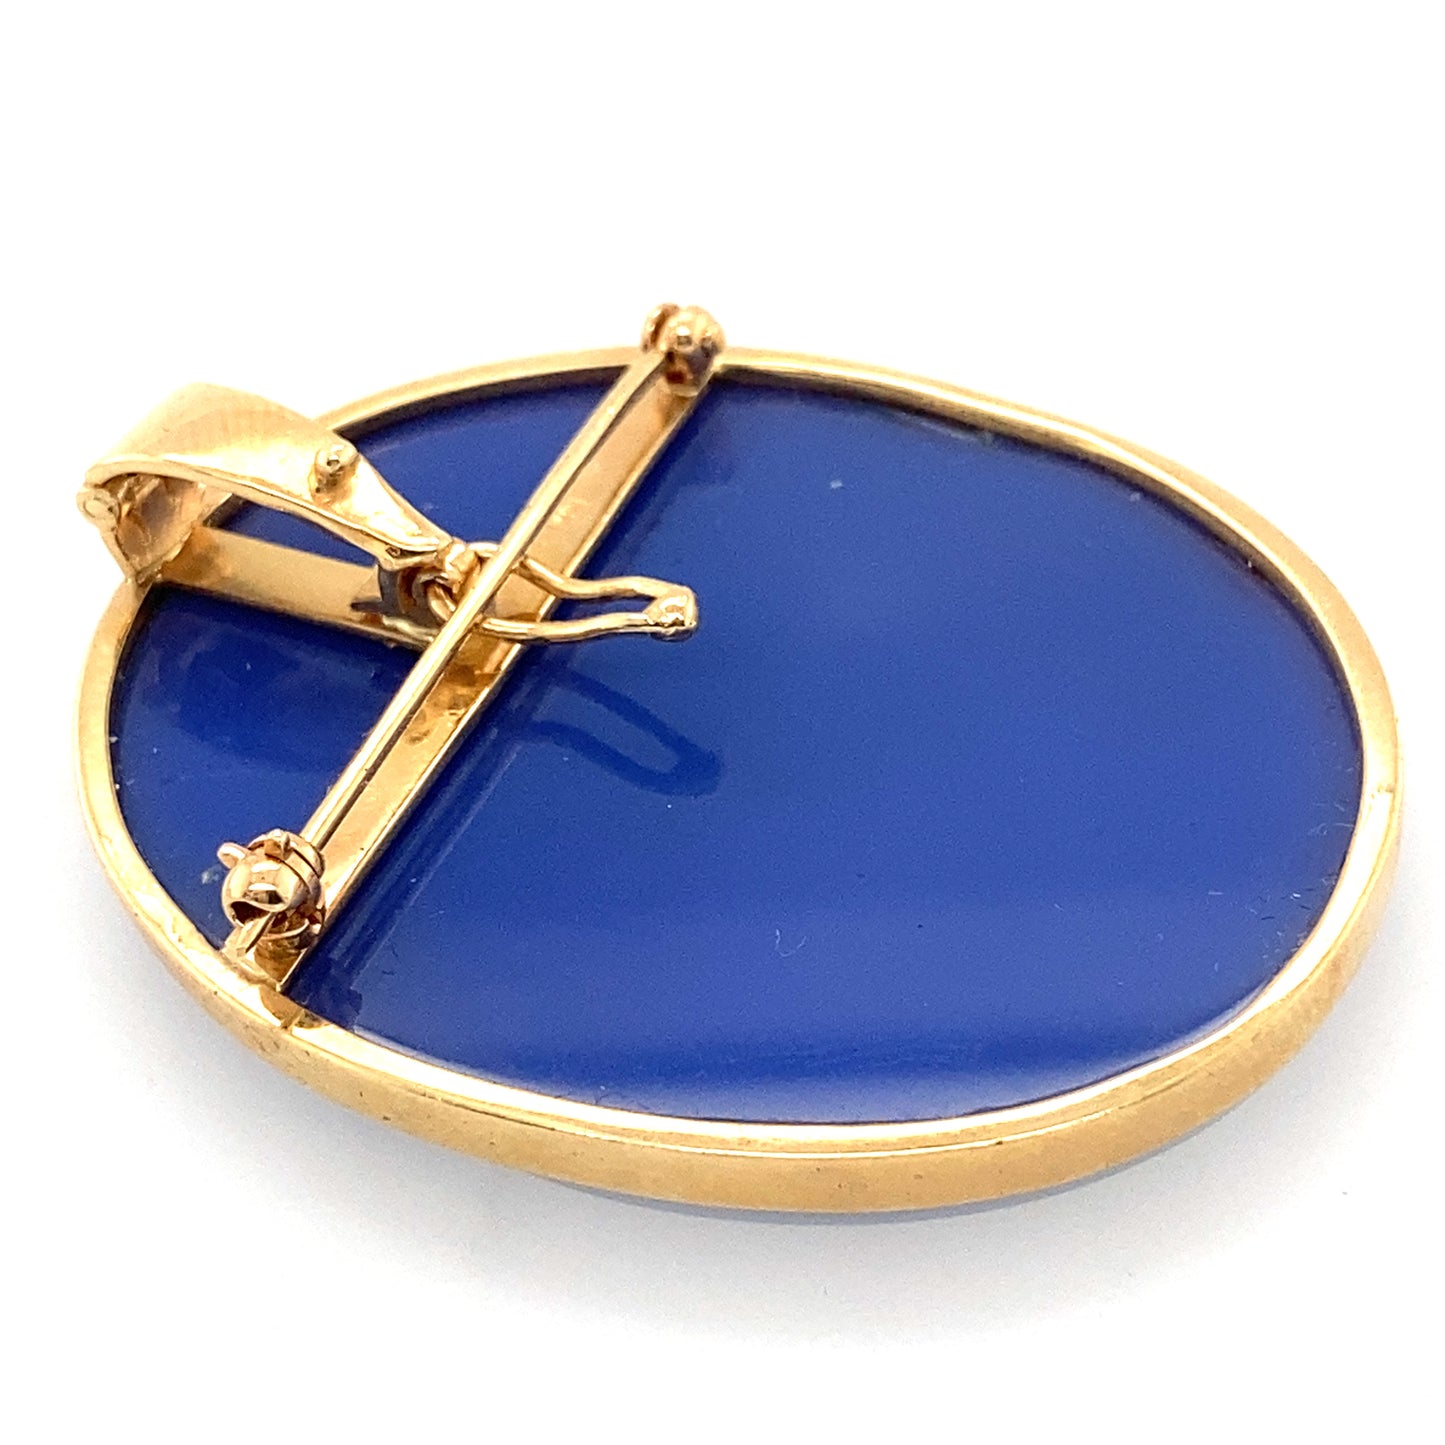 14k yellow gold frame into a beautiful blue color cameo. Gorgeous art work.